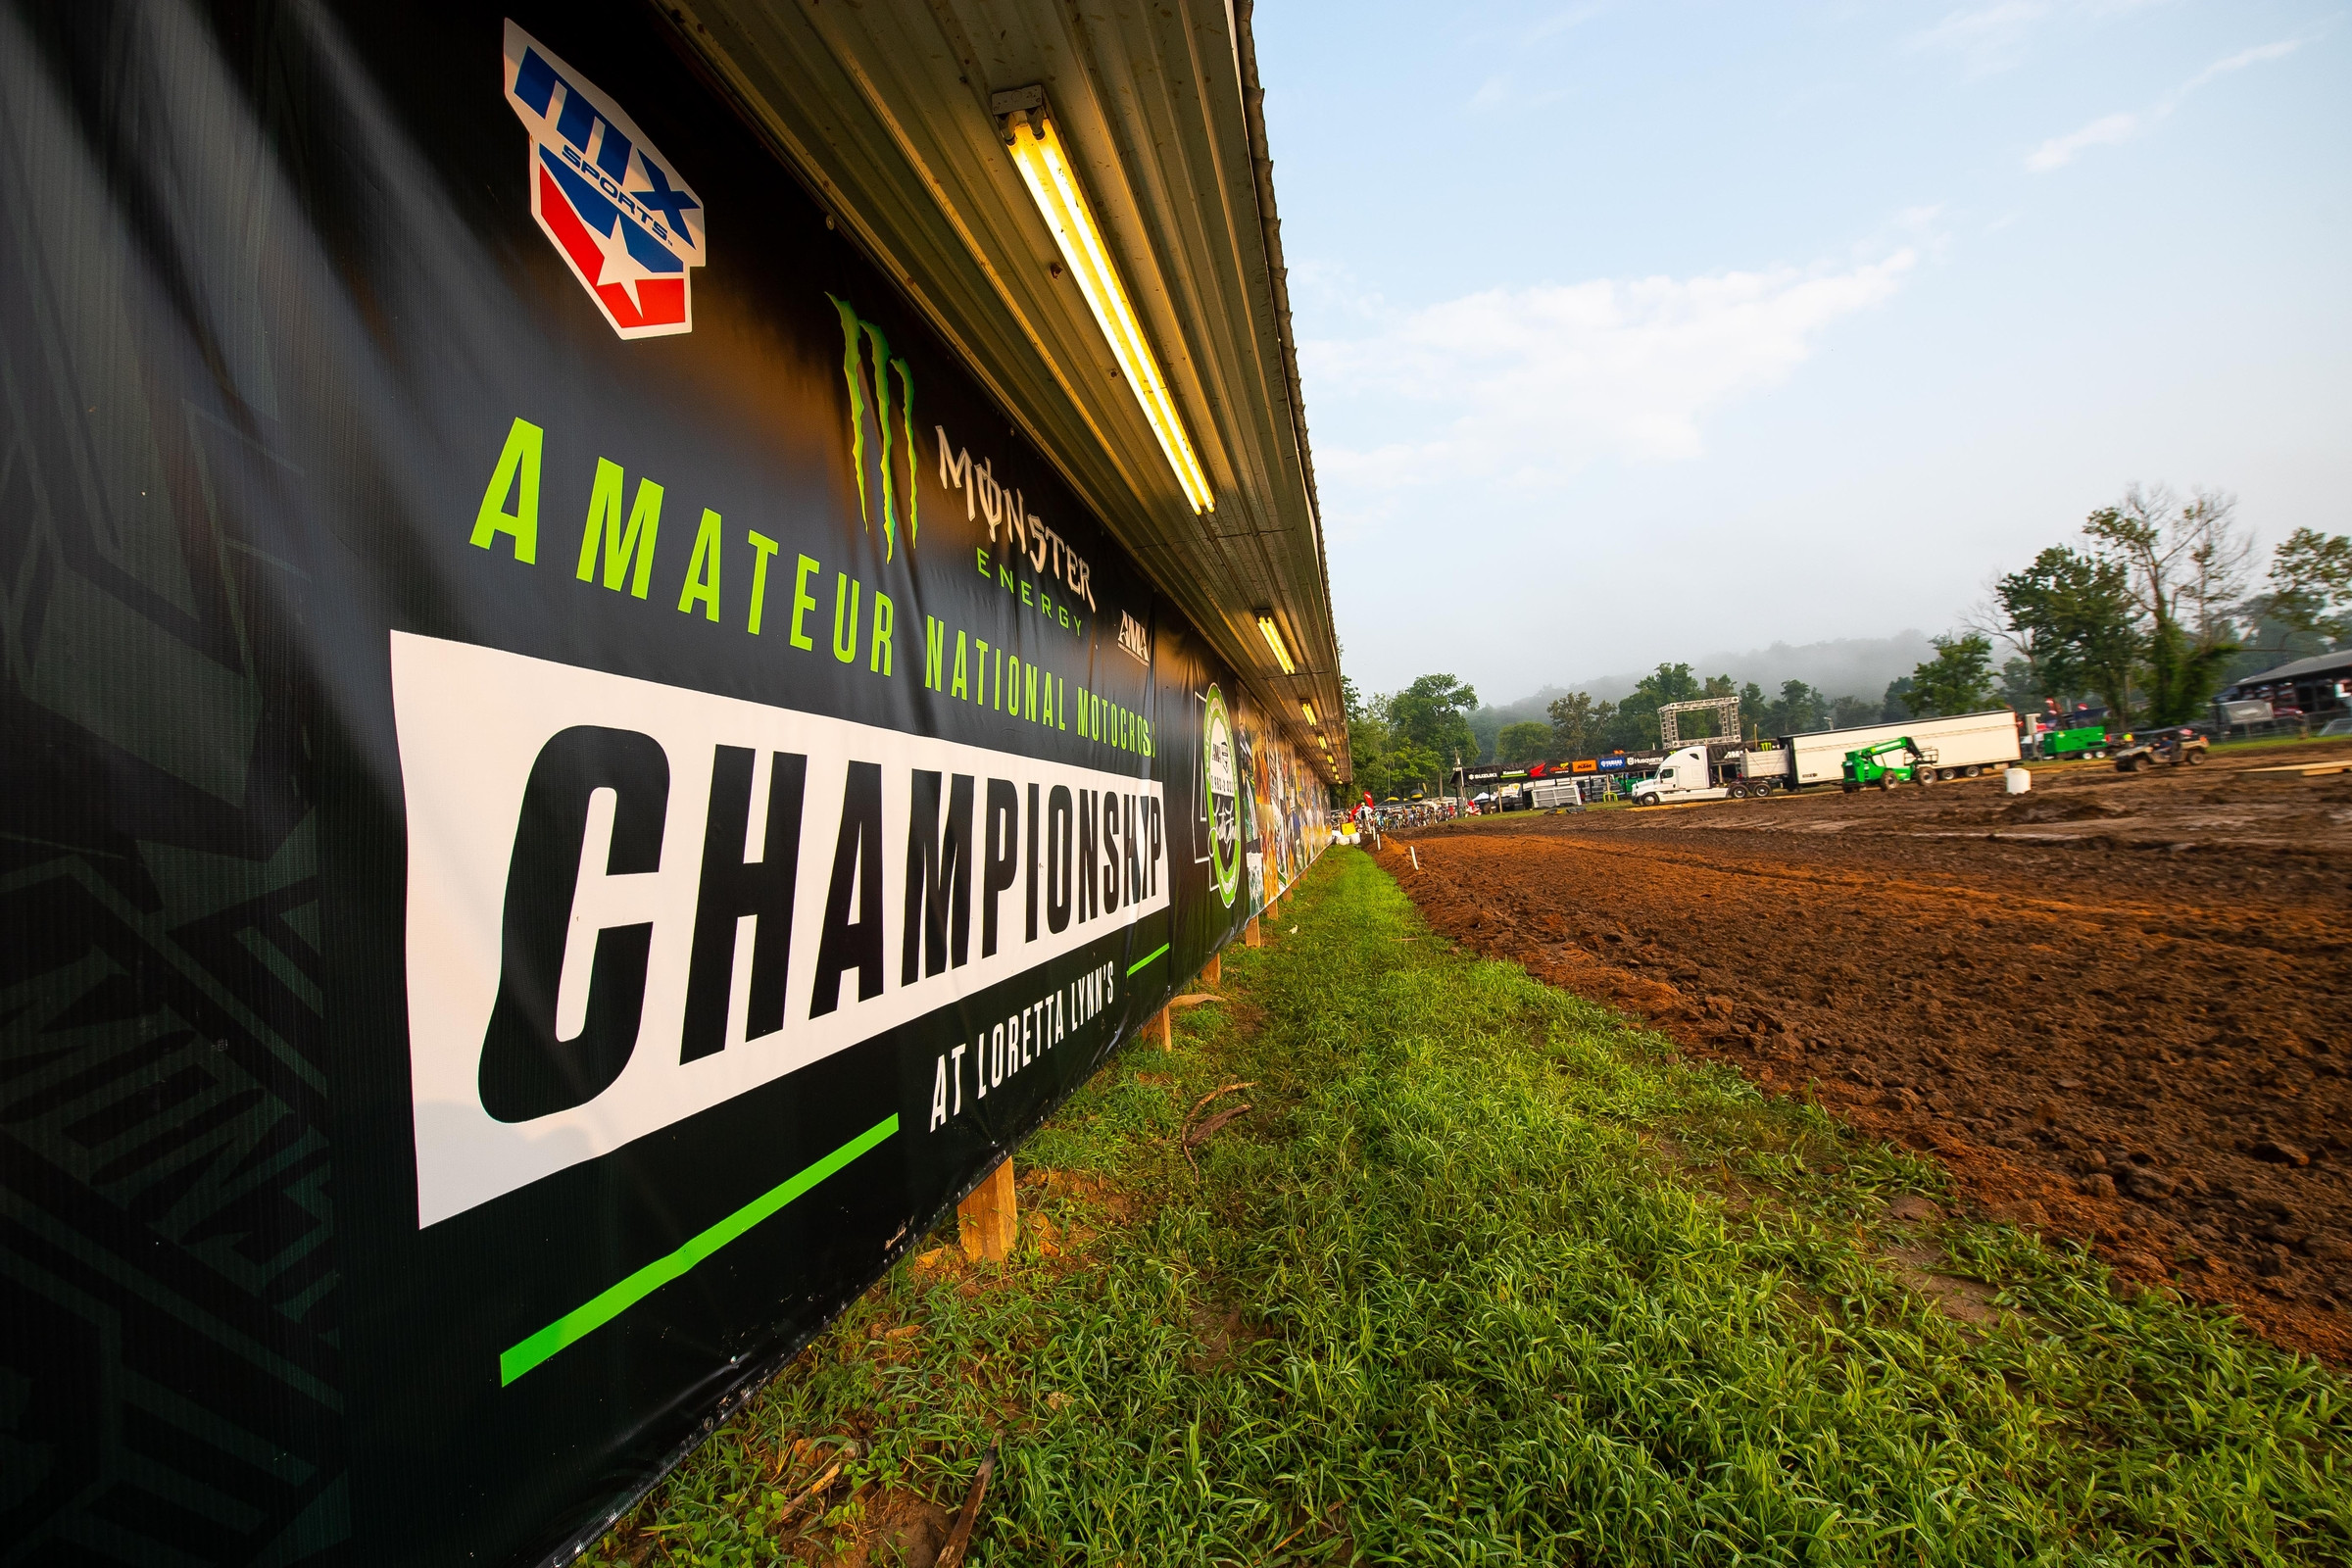 Podcast on Origins of AMA Amateur National Motocross Championship at Loretta Lynns Ranch image picture